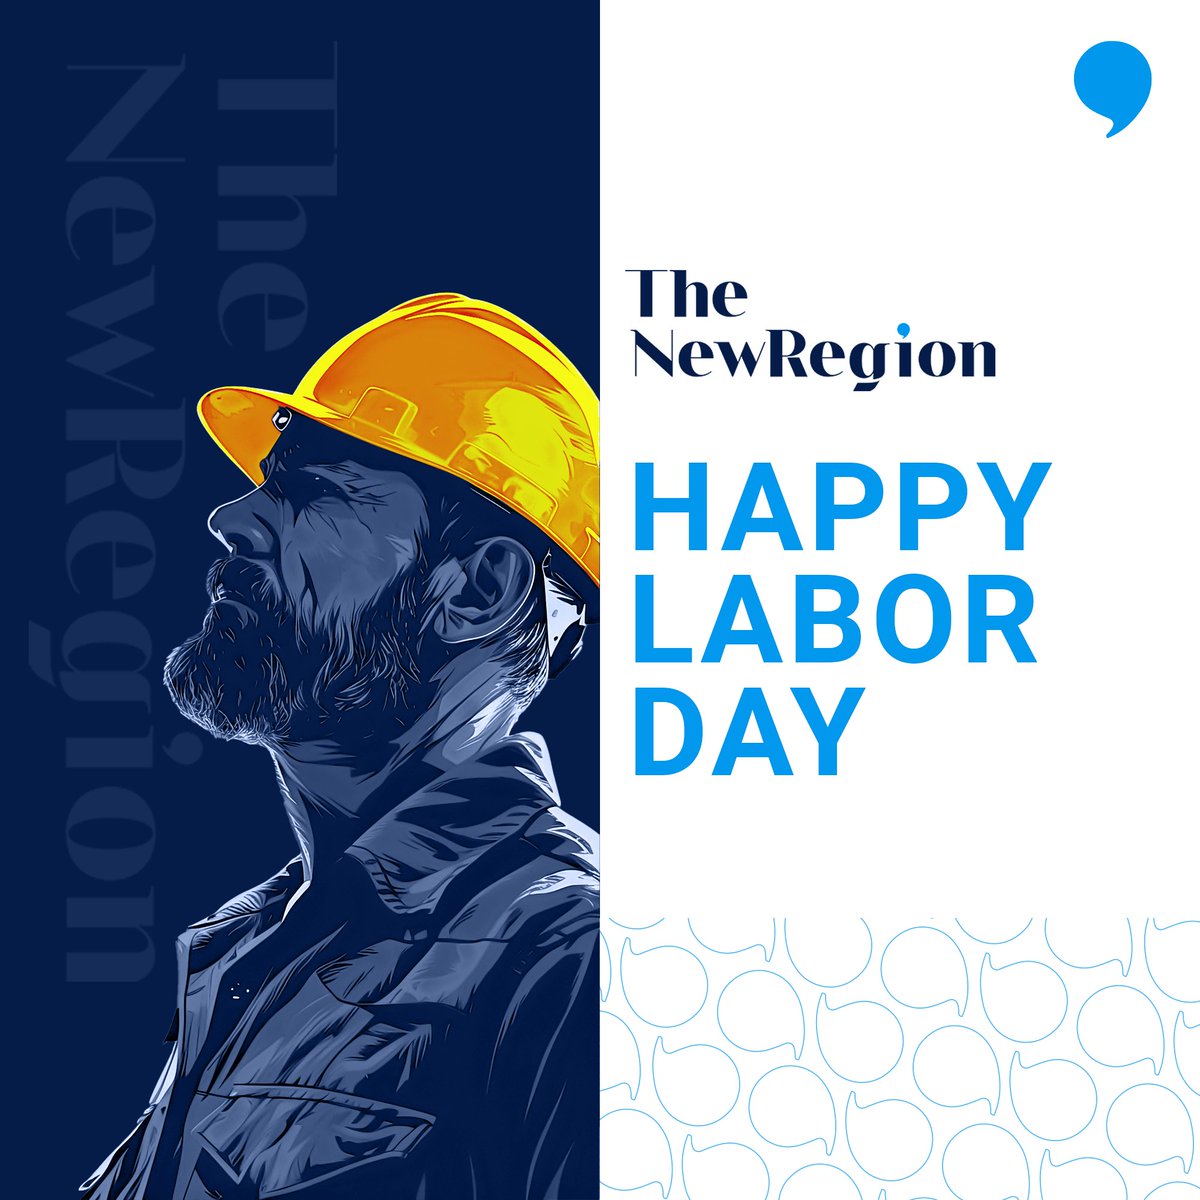 The New Region wishes all workers in every field a happy #LaborDay 
#TheNewRegion